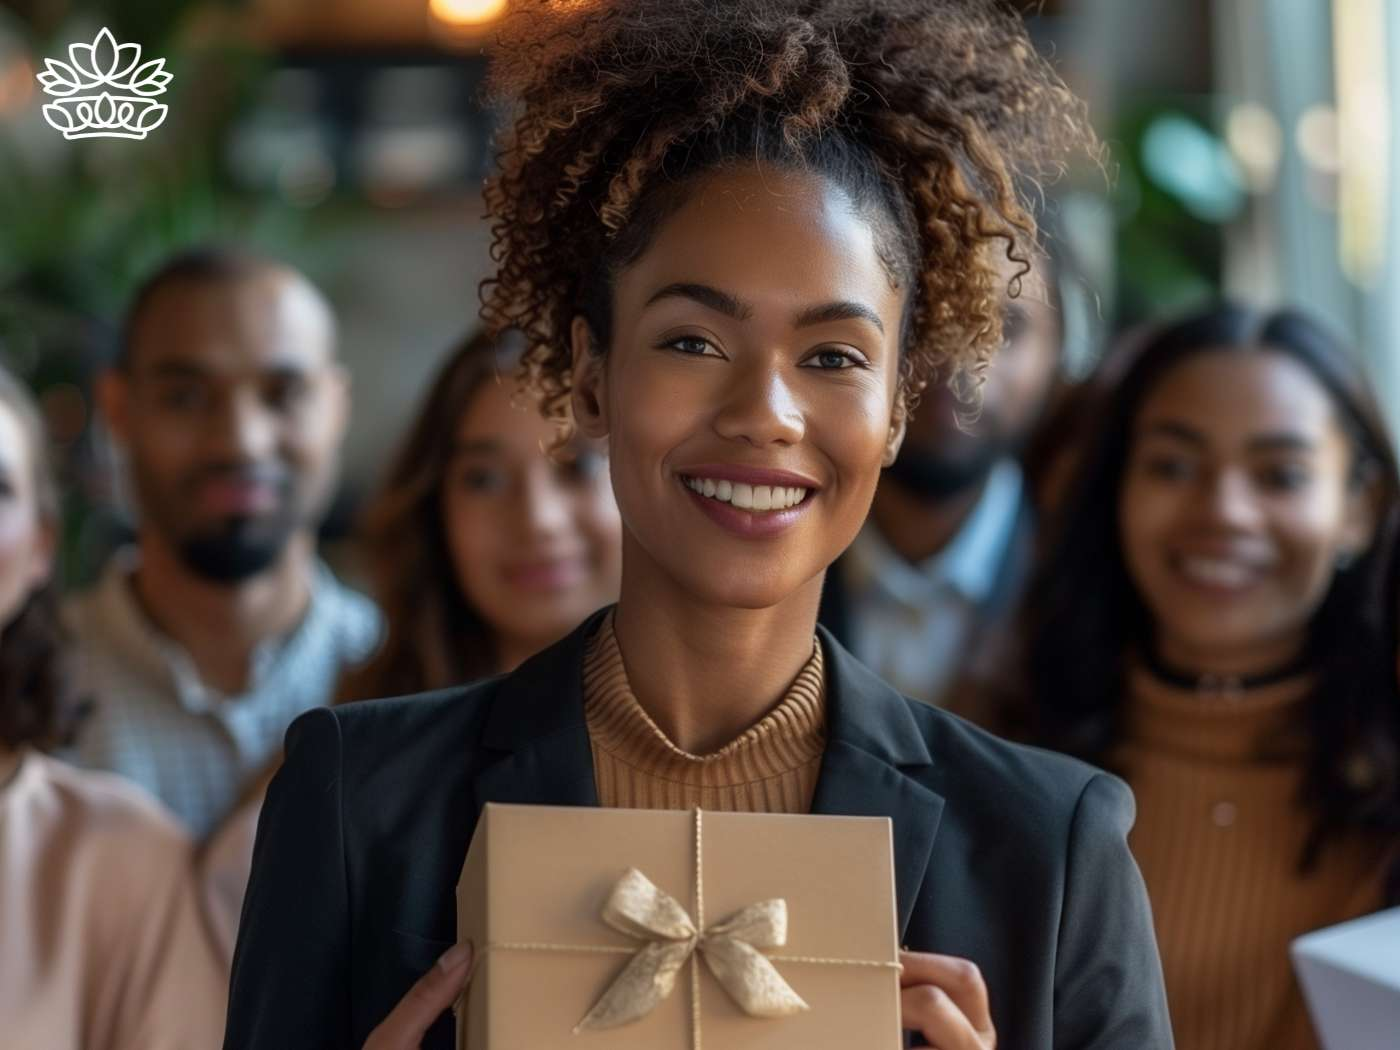 A radiant woman with curly hair smiling and holding a gift box, surrounded by a diverse and cheerful group, all presented by Fabulous Flowers and Gifts."